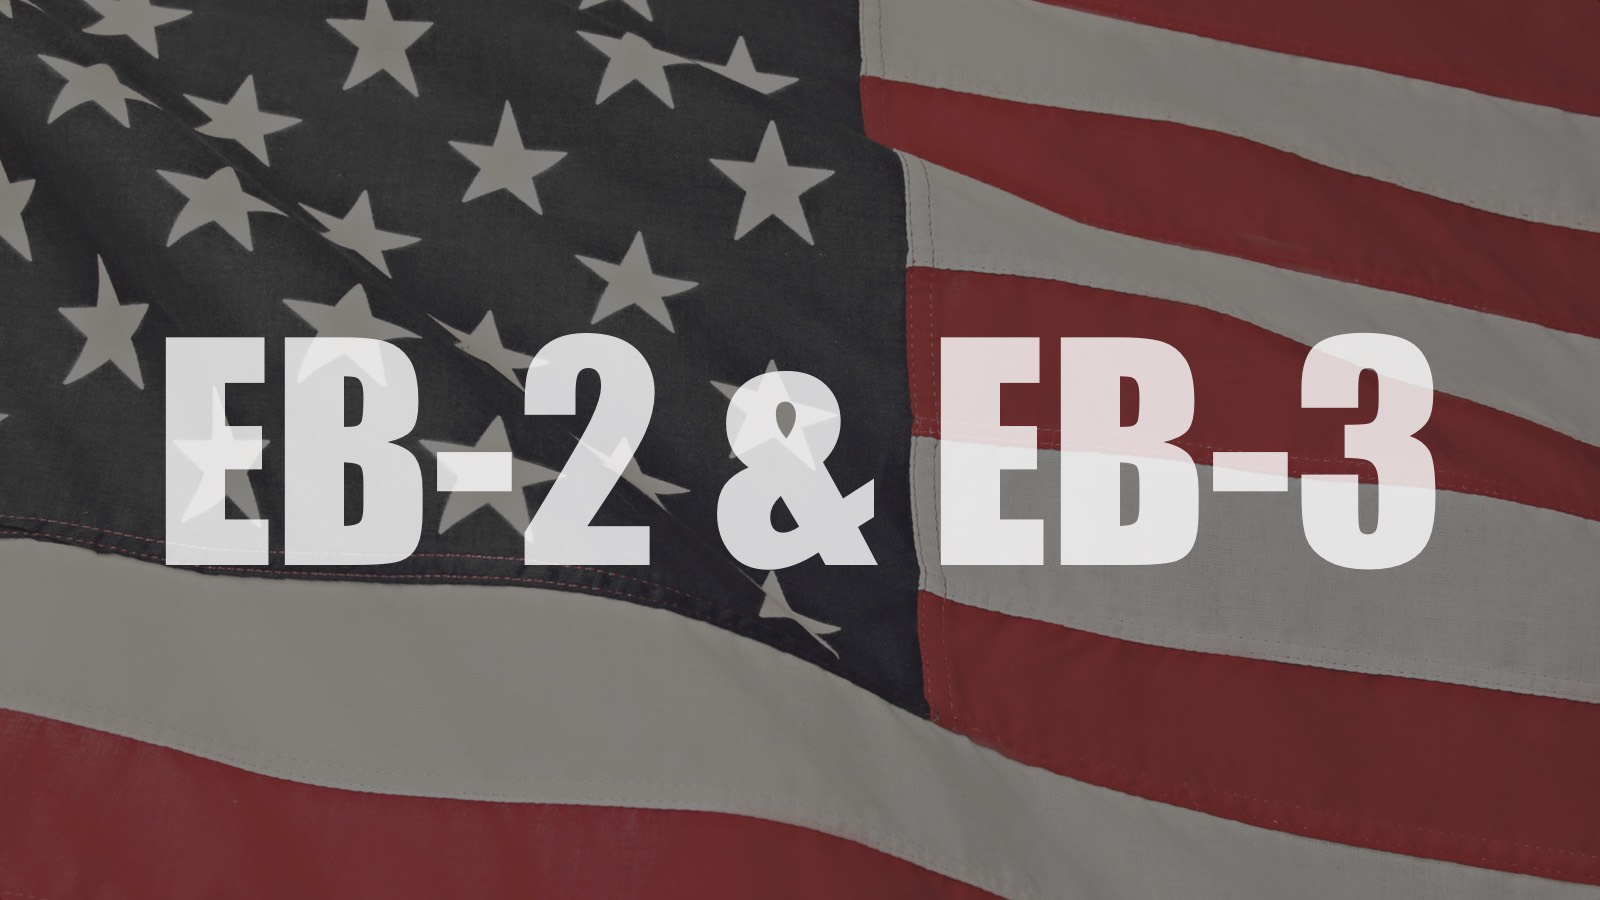 The Difference Between EB-2 & EB-3 PERMs